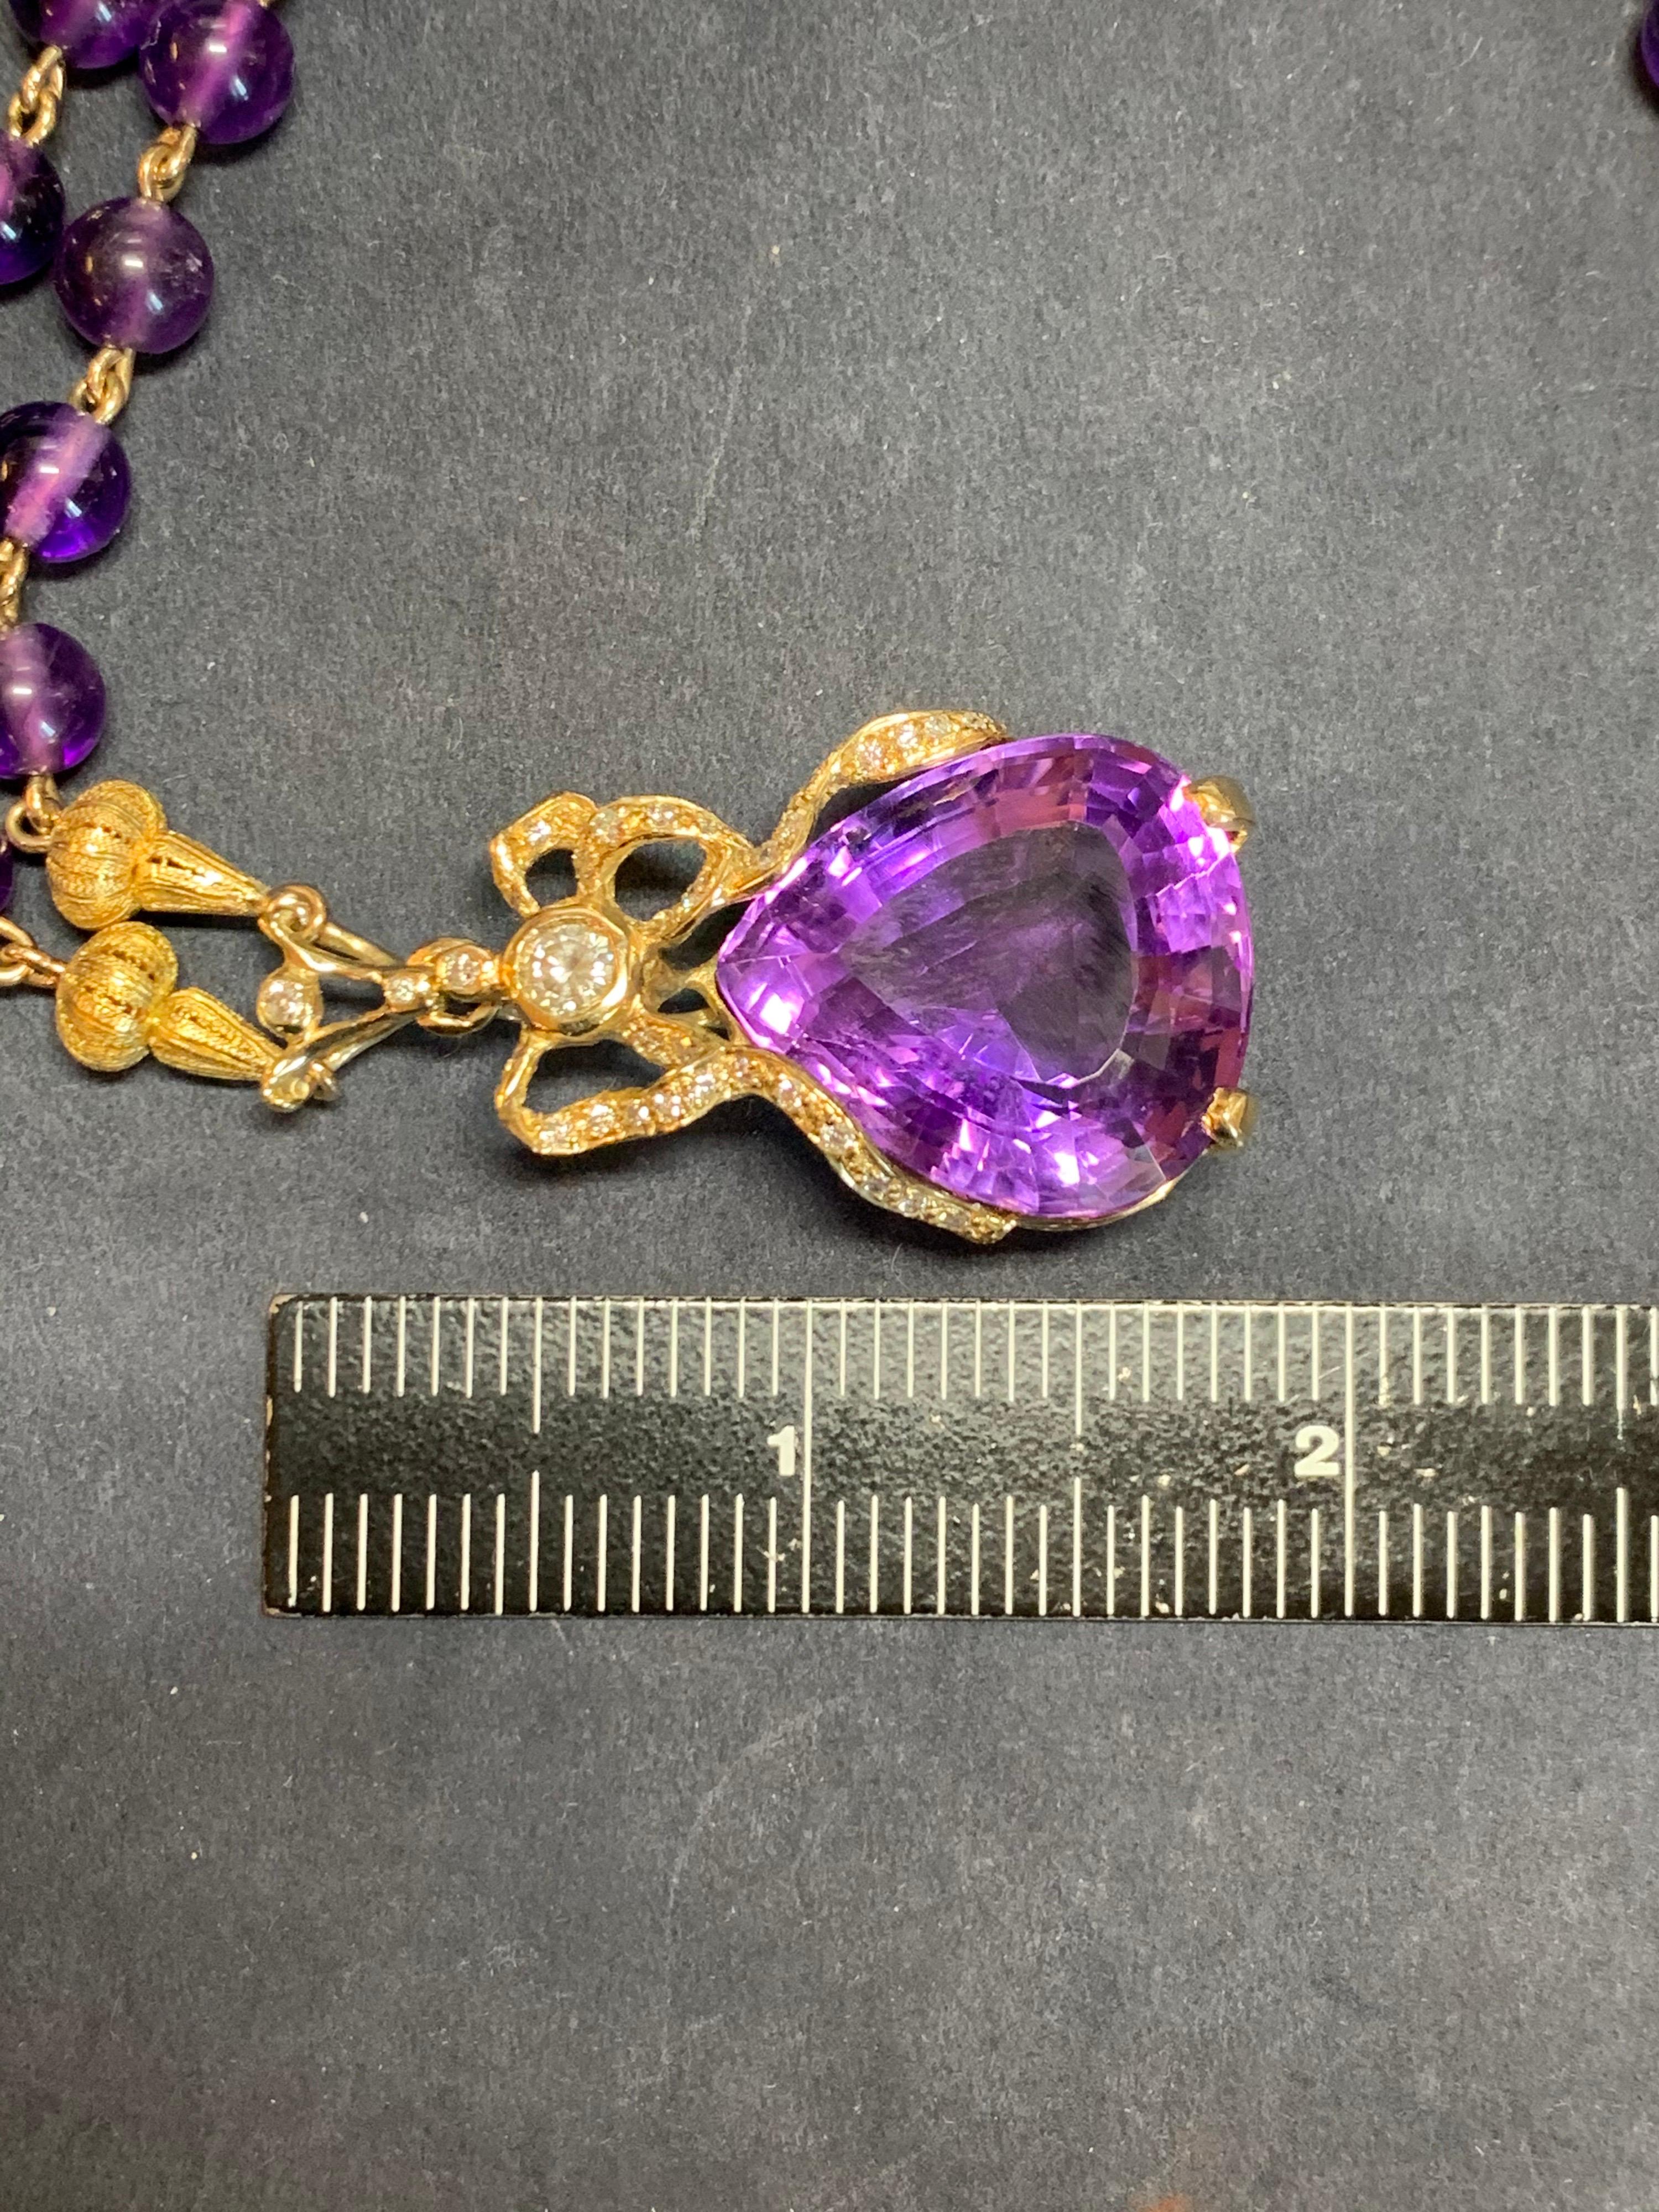 Retro Gold 35 Carat Natural Amethyst and Diamond Pendant Necklace, circa 1960 For Sale 7